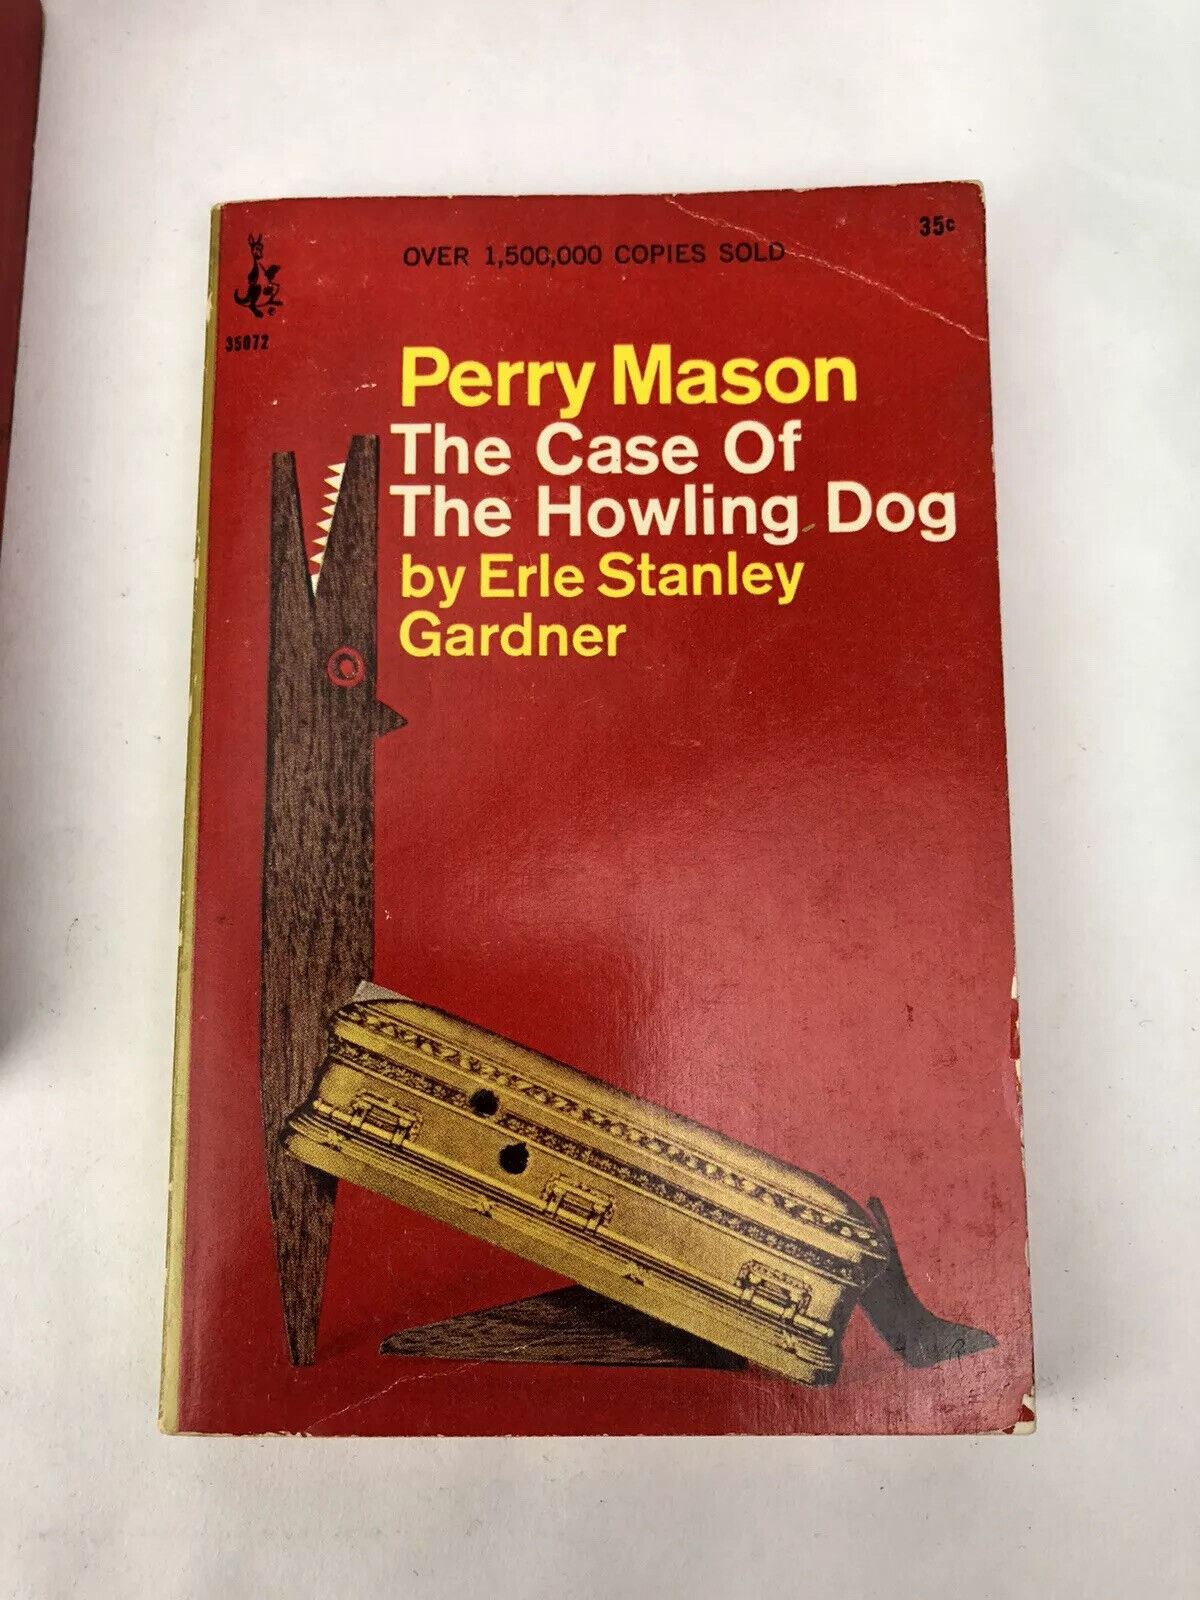 Vintage 1960’s Erle Stanley Gardner PERRY MASON MYSTERY Lot of 8 Pocket Books